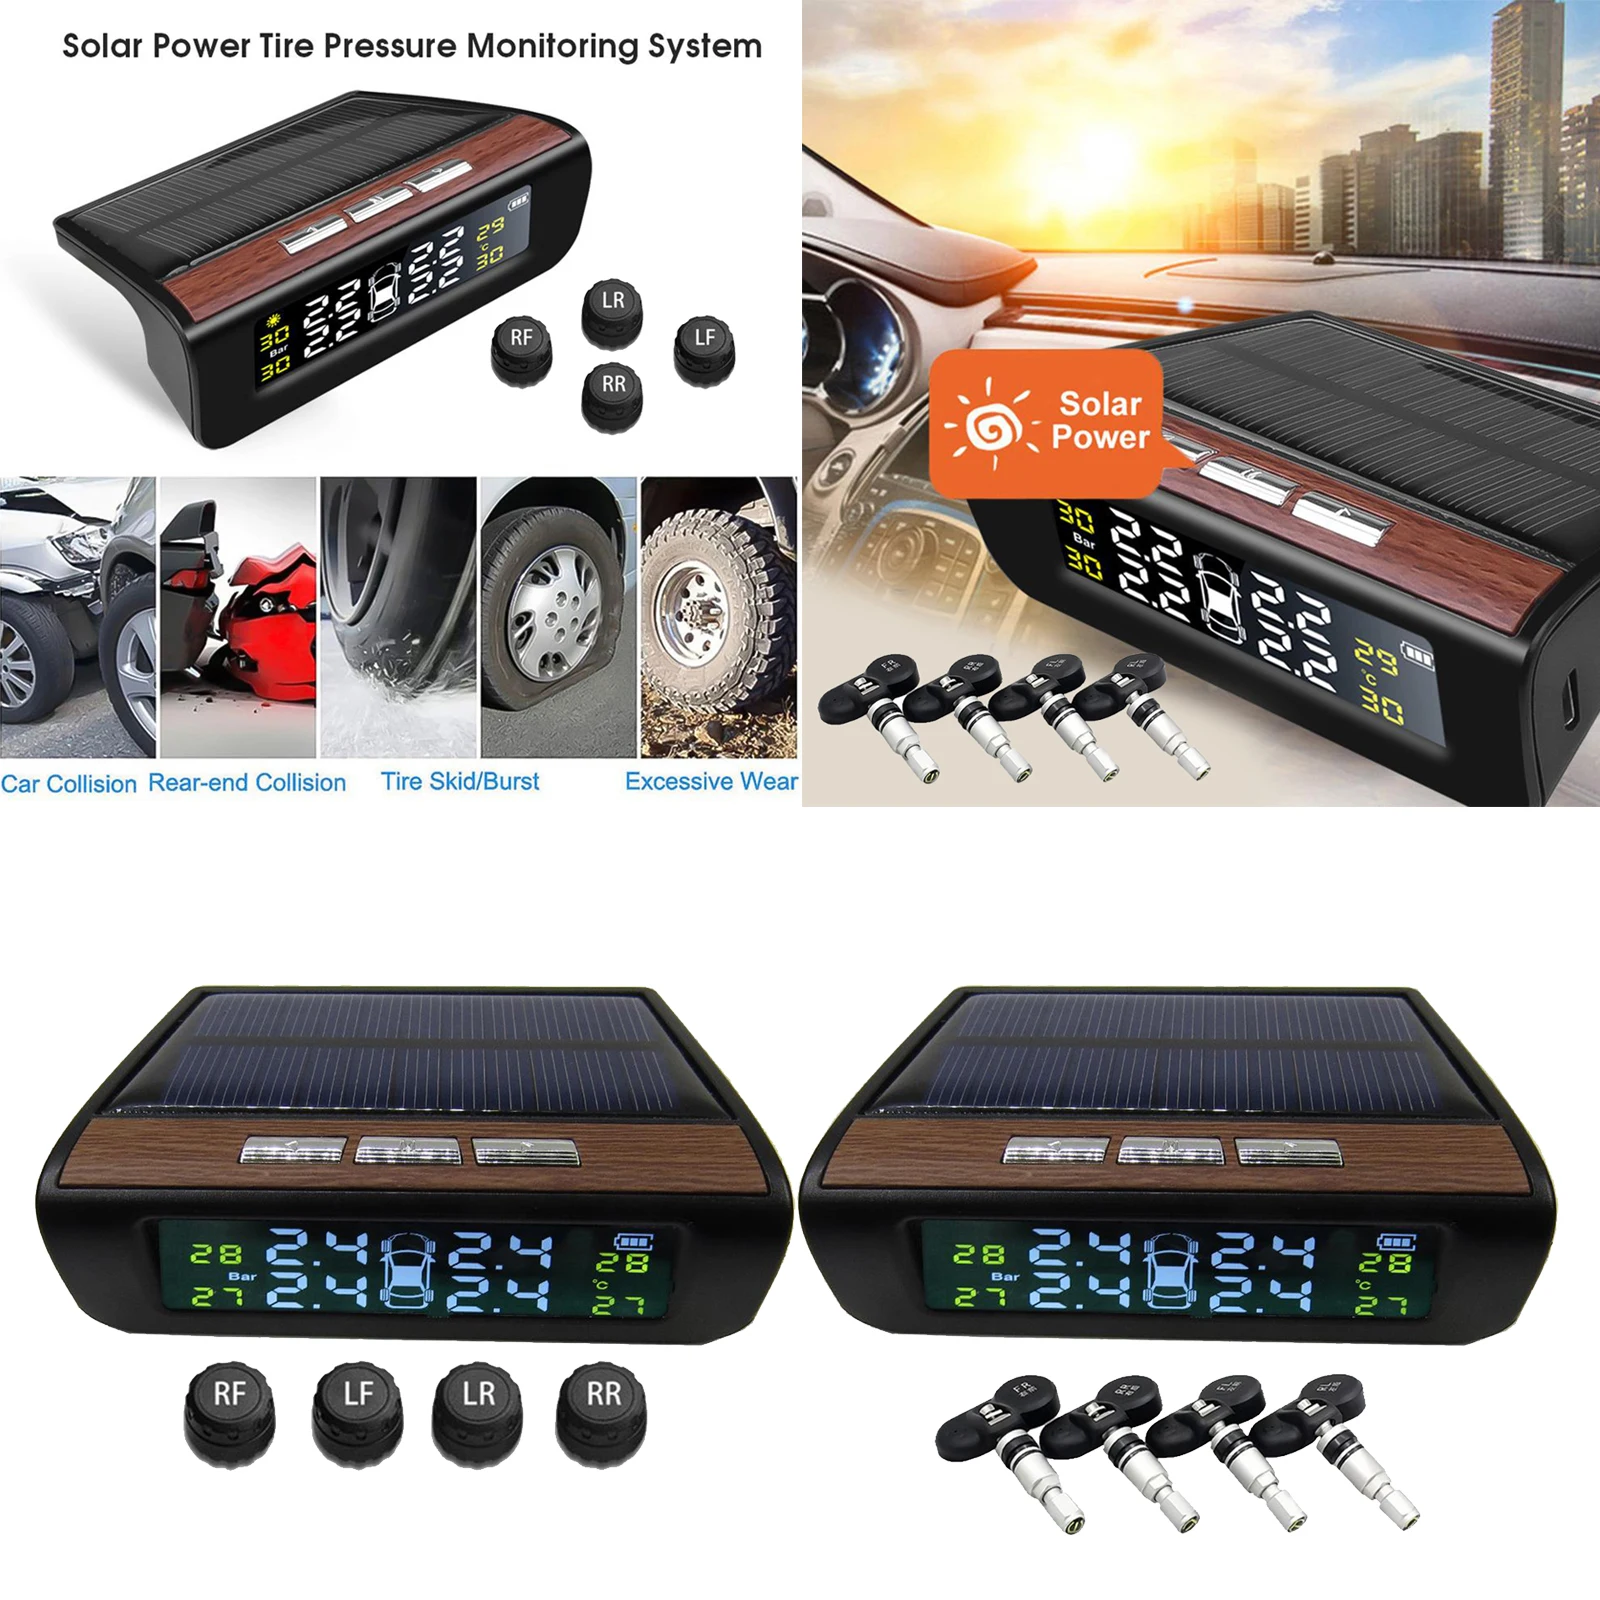 TPMS Car Tire Pressure Alarm Monitor System Real-time Display Wwireless Solar Power TPMS with 4 Sensors